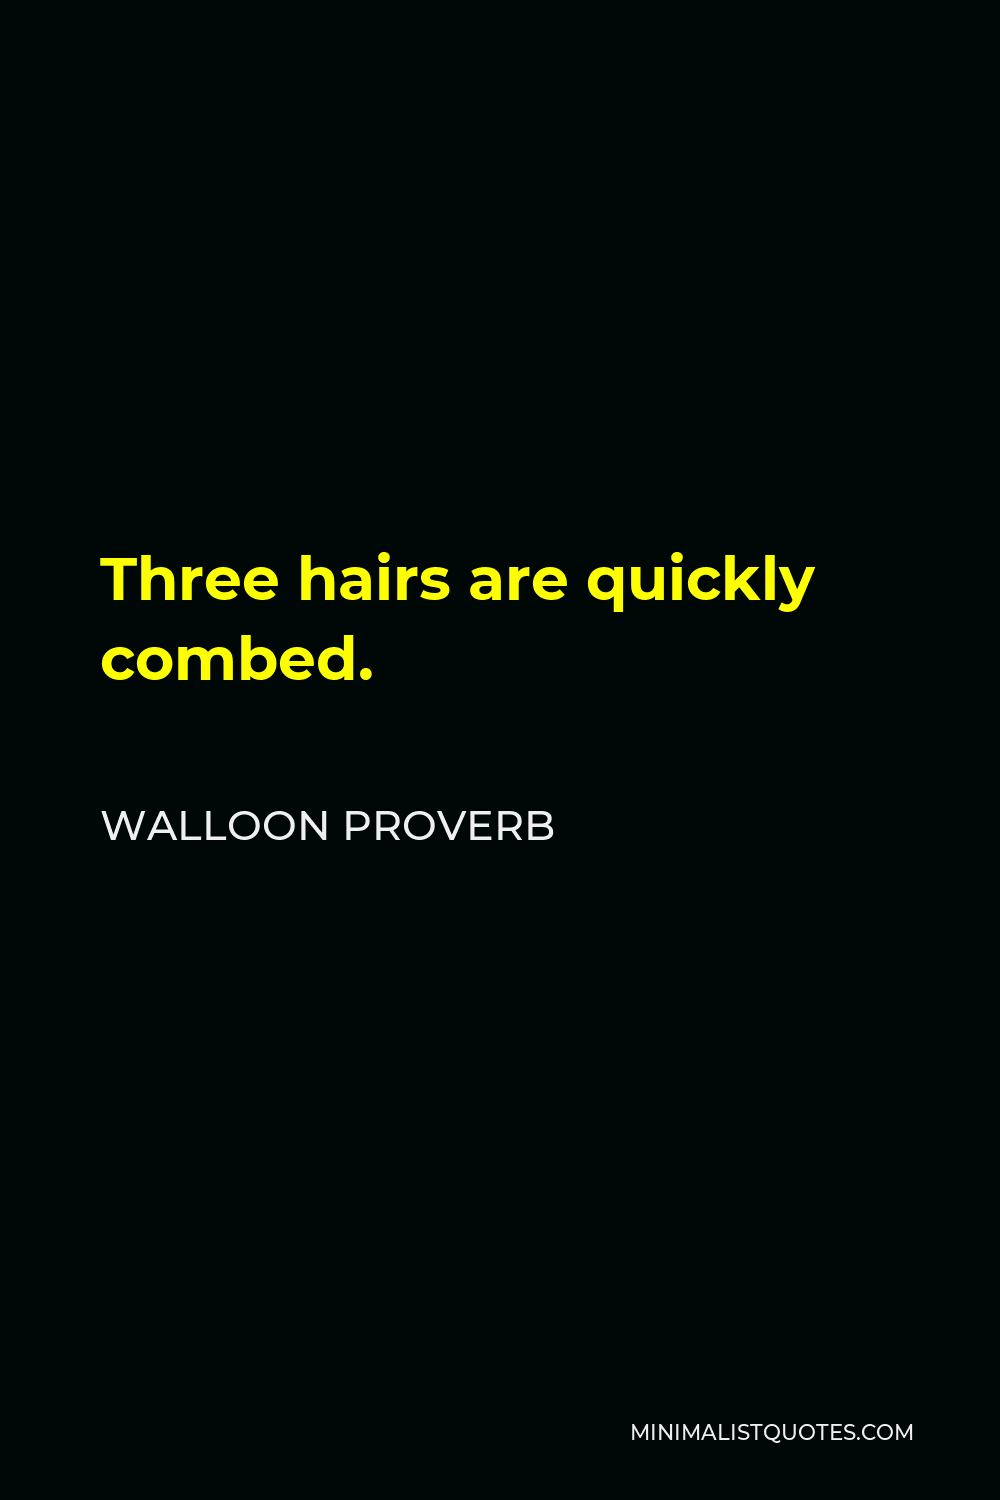 Walloon Proverb Quote - Three hairs are quickly combed.